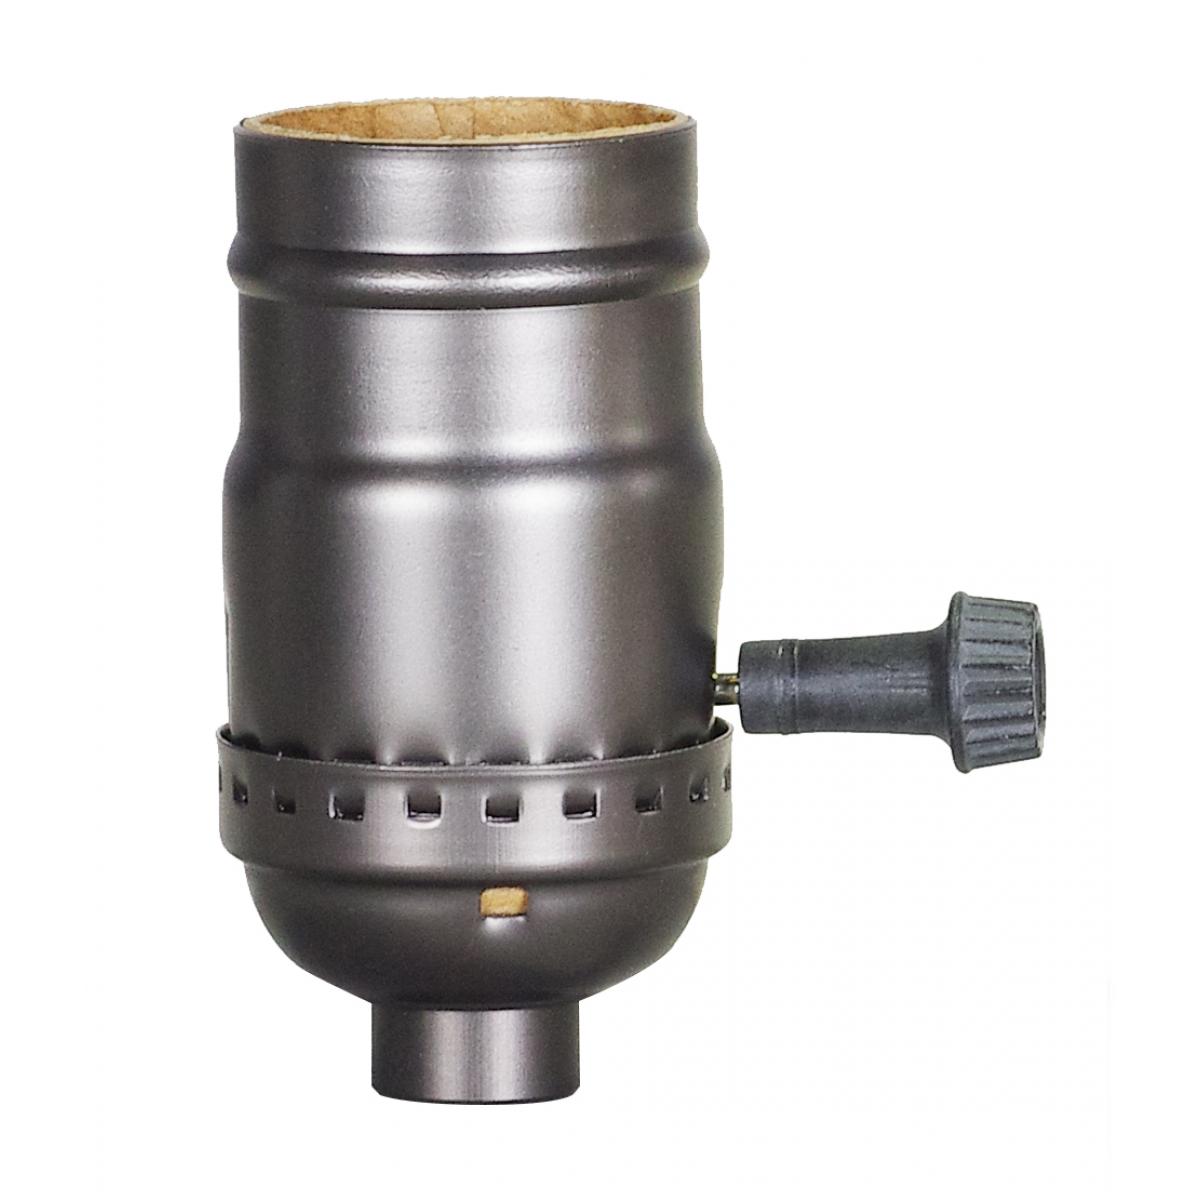 Satco 80-2437 On-Off Push Thru Socket With Side Outlet; For SPT-2; 1/8 IPS; Aluminum; Antique Brass Finish; 660W; 250V